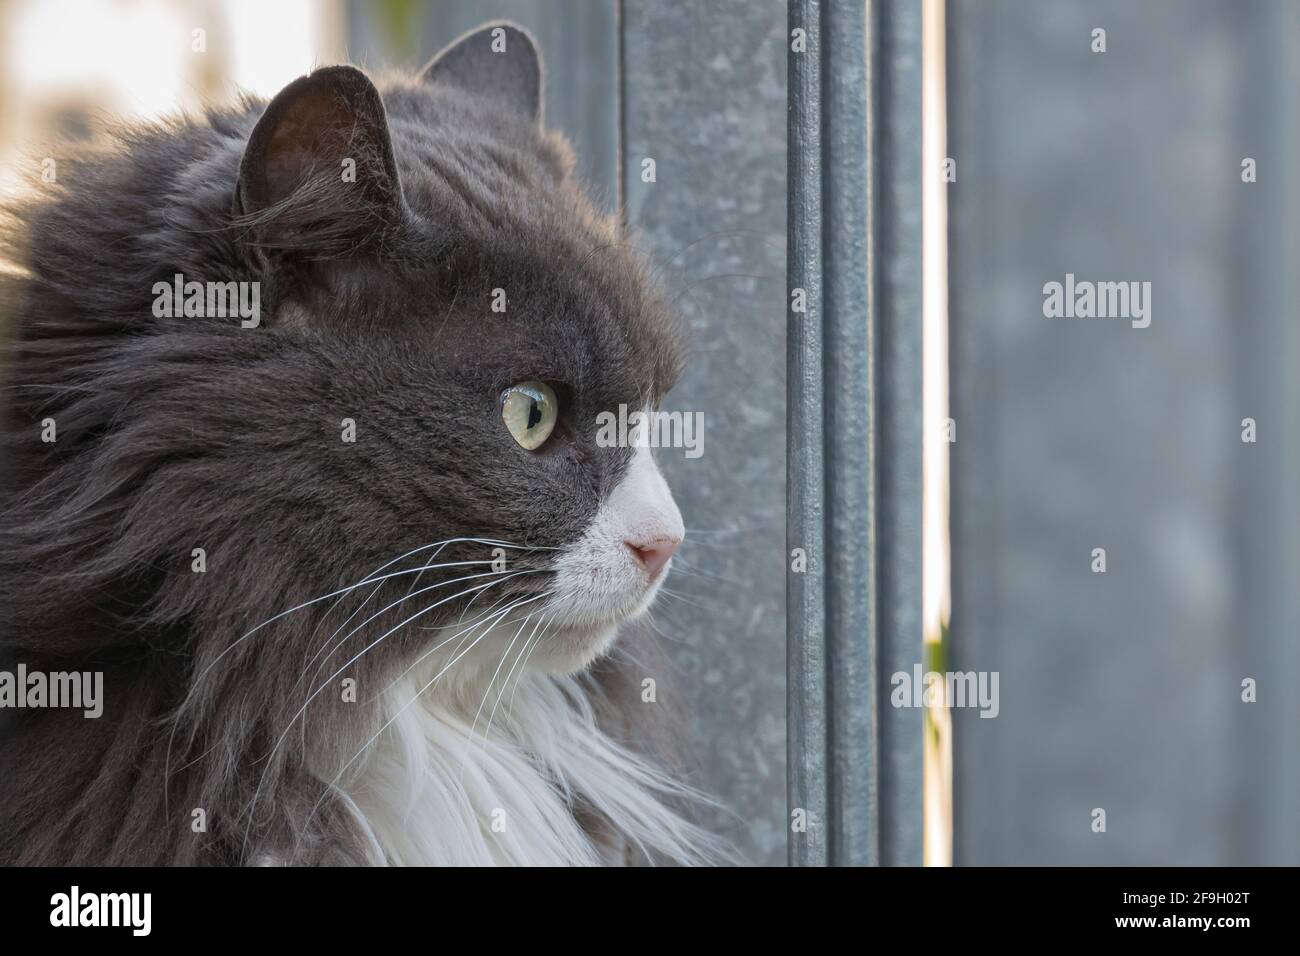 portrait of a cat with long gray and white hair outdoors Stock Photo